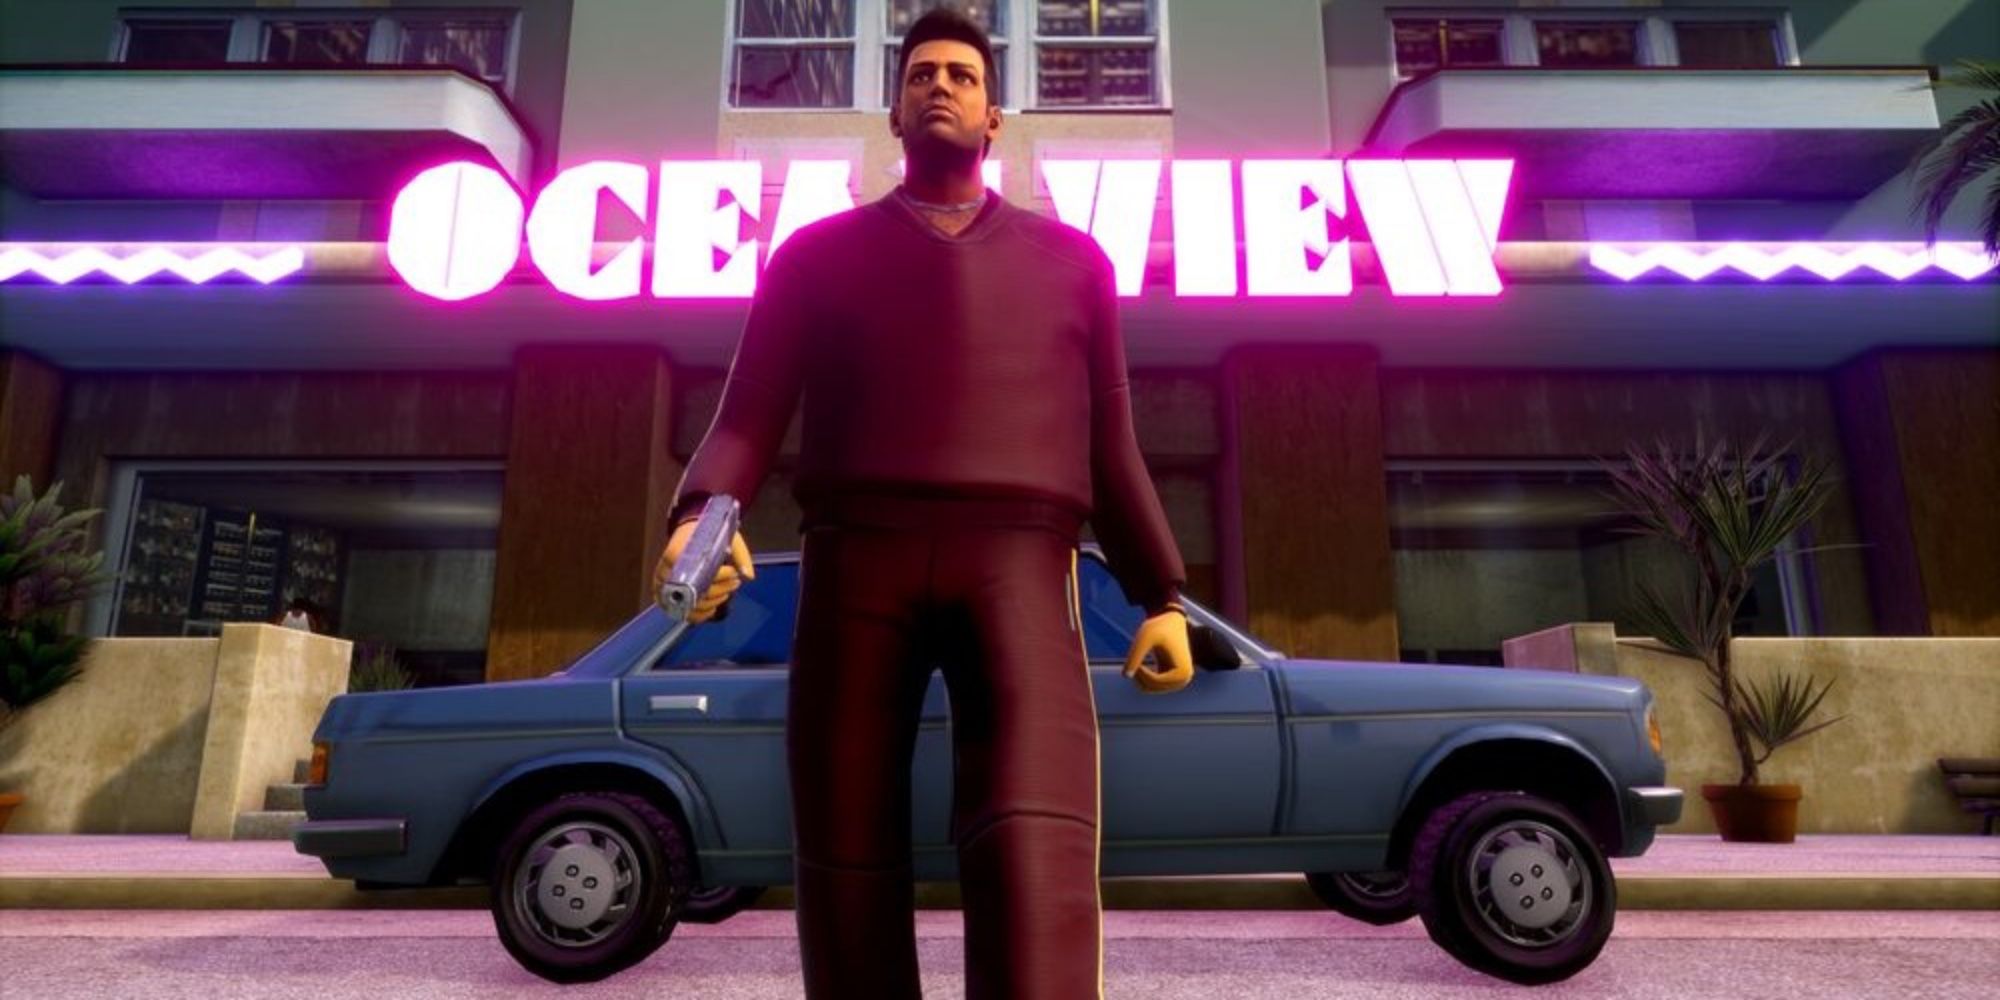 Best Years in Gaming - 2002 - Grand Theft Auto - Vice City - Tommy Vercetti seeks adventure in Vice City